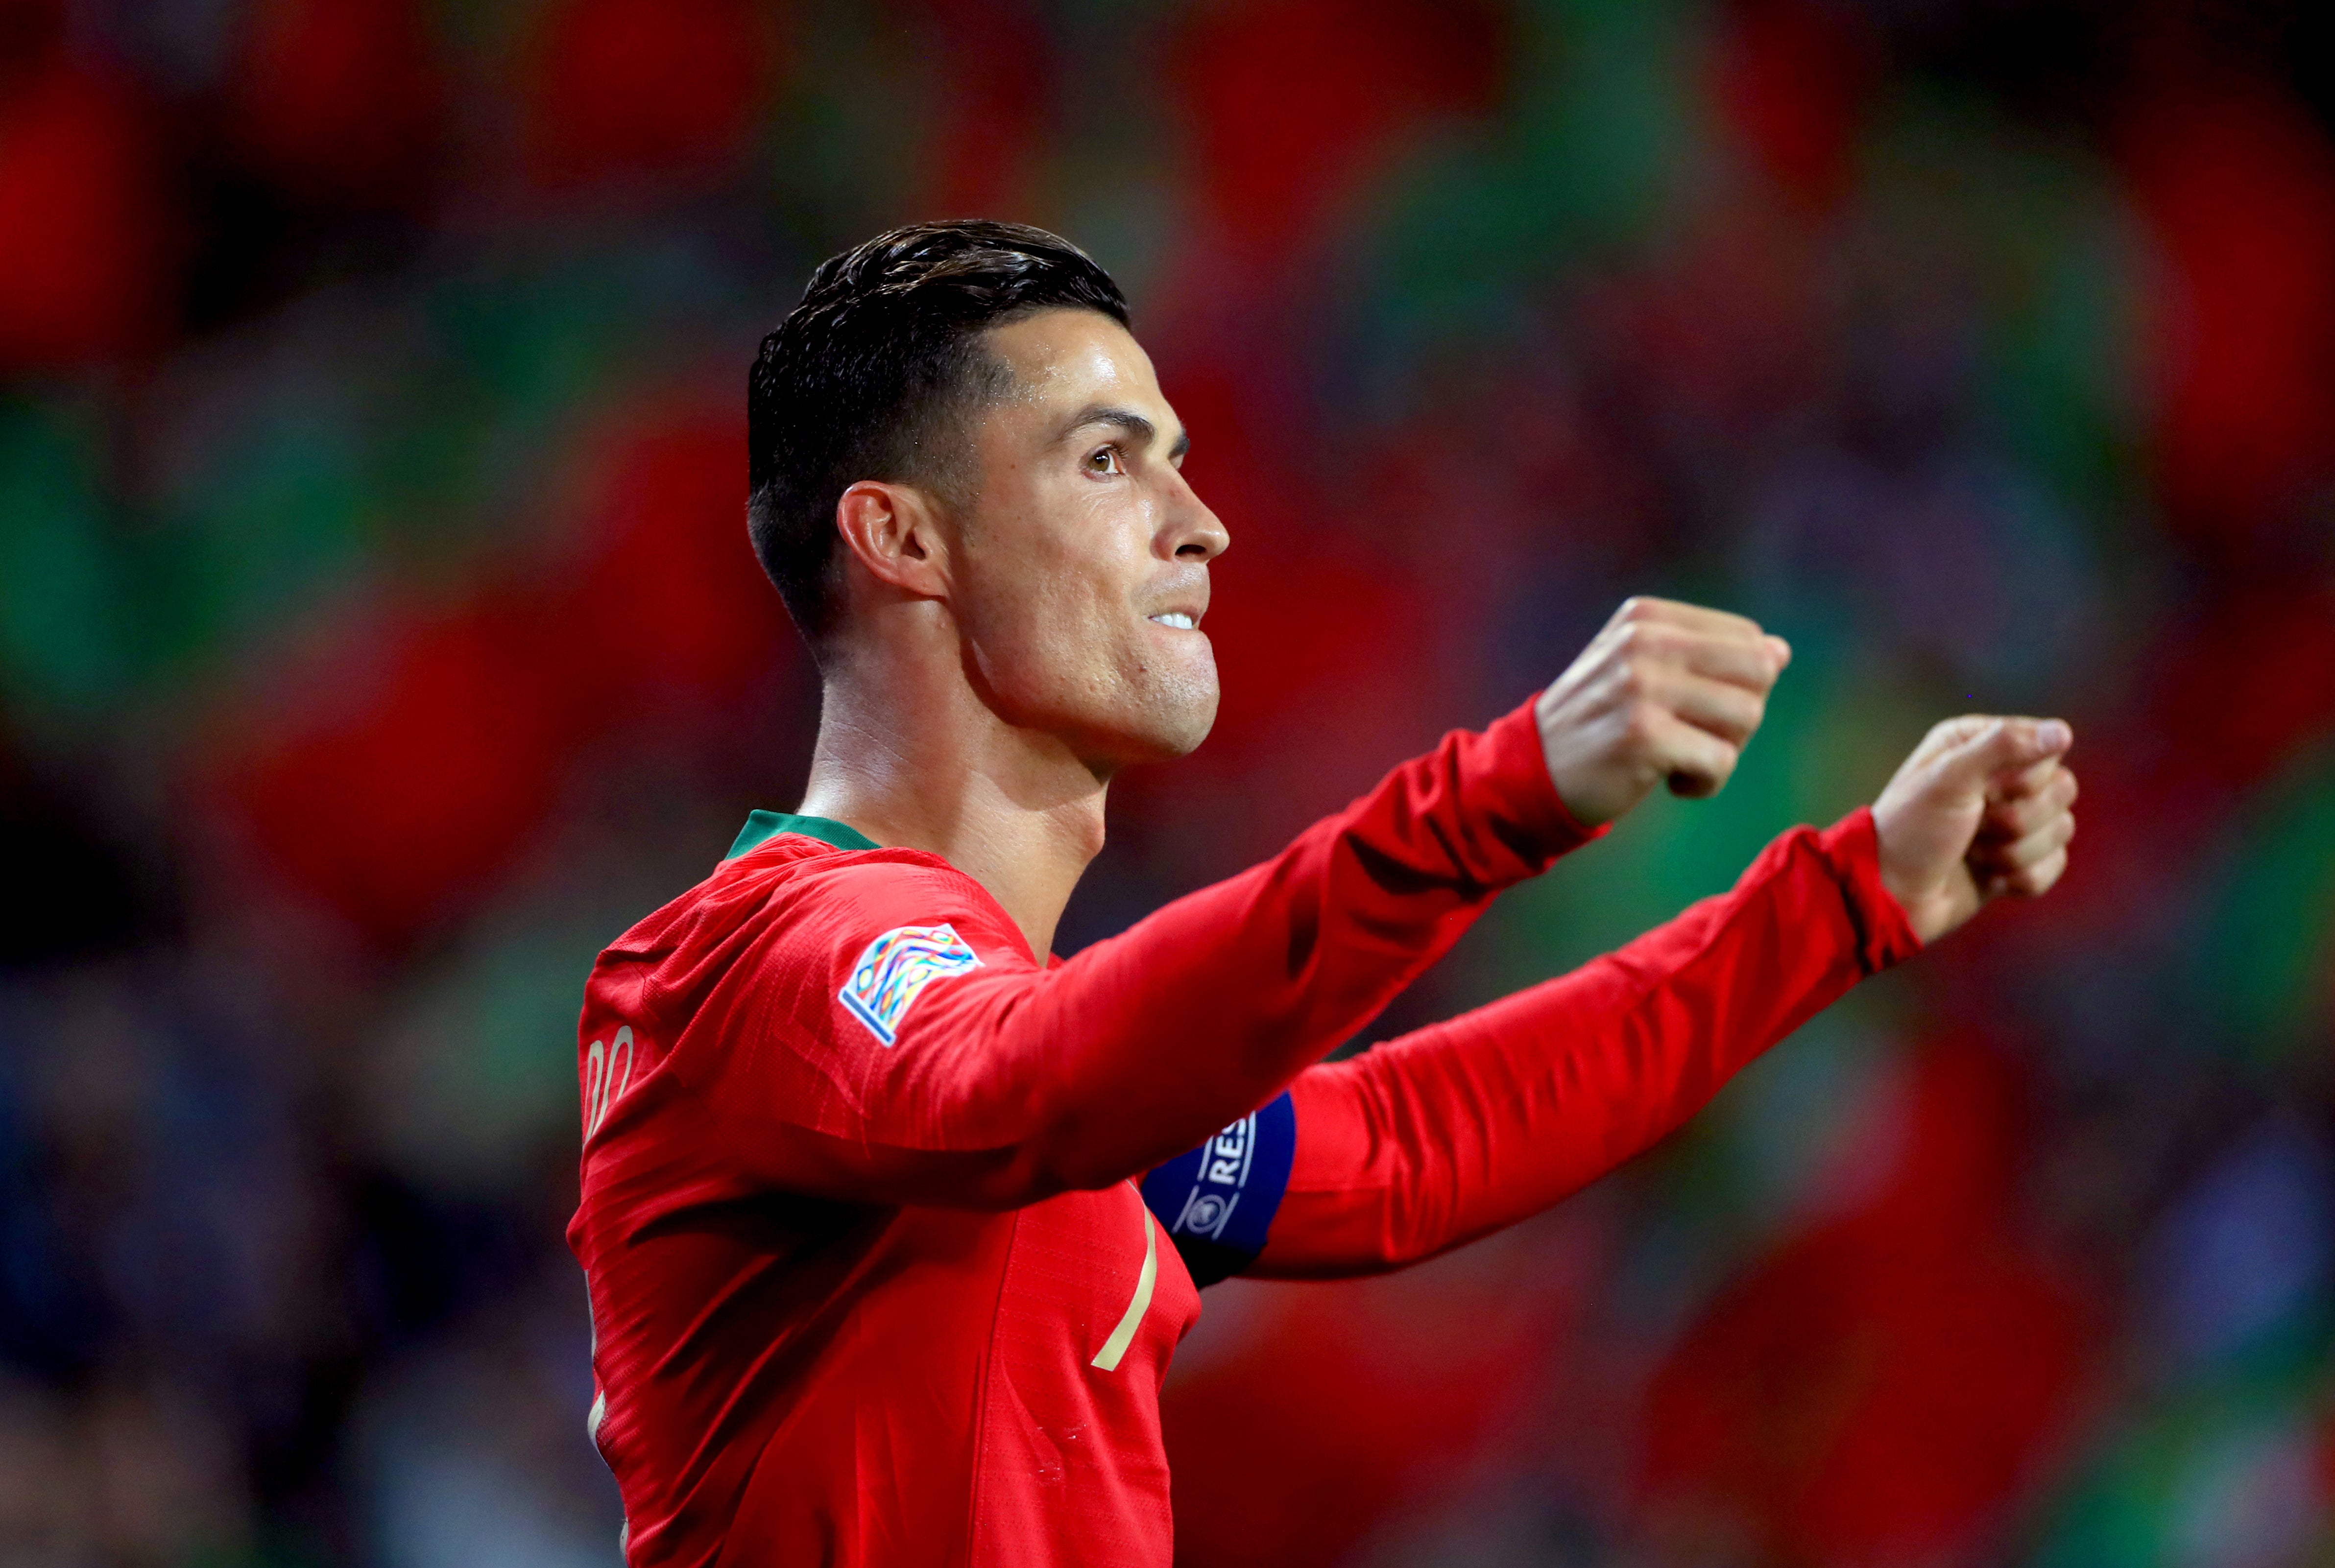 Portugal skipper Cristiano Ronaldo will become the first man to play at five Euros tournaments